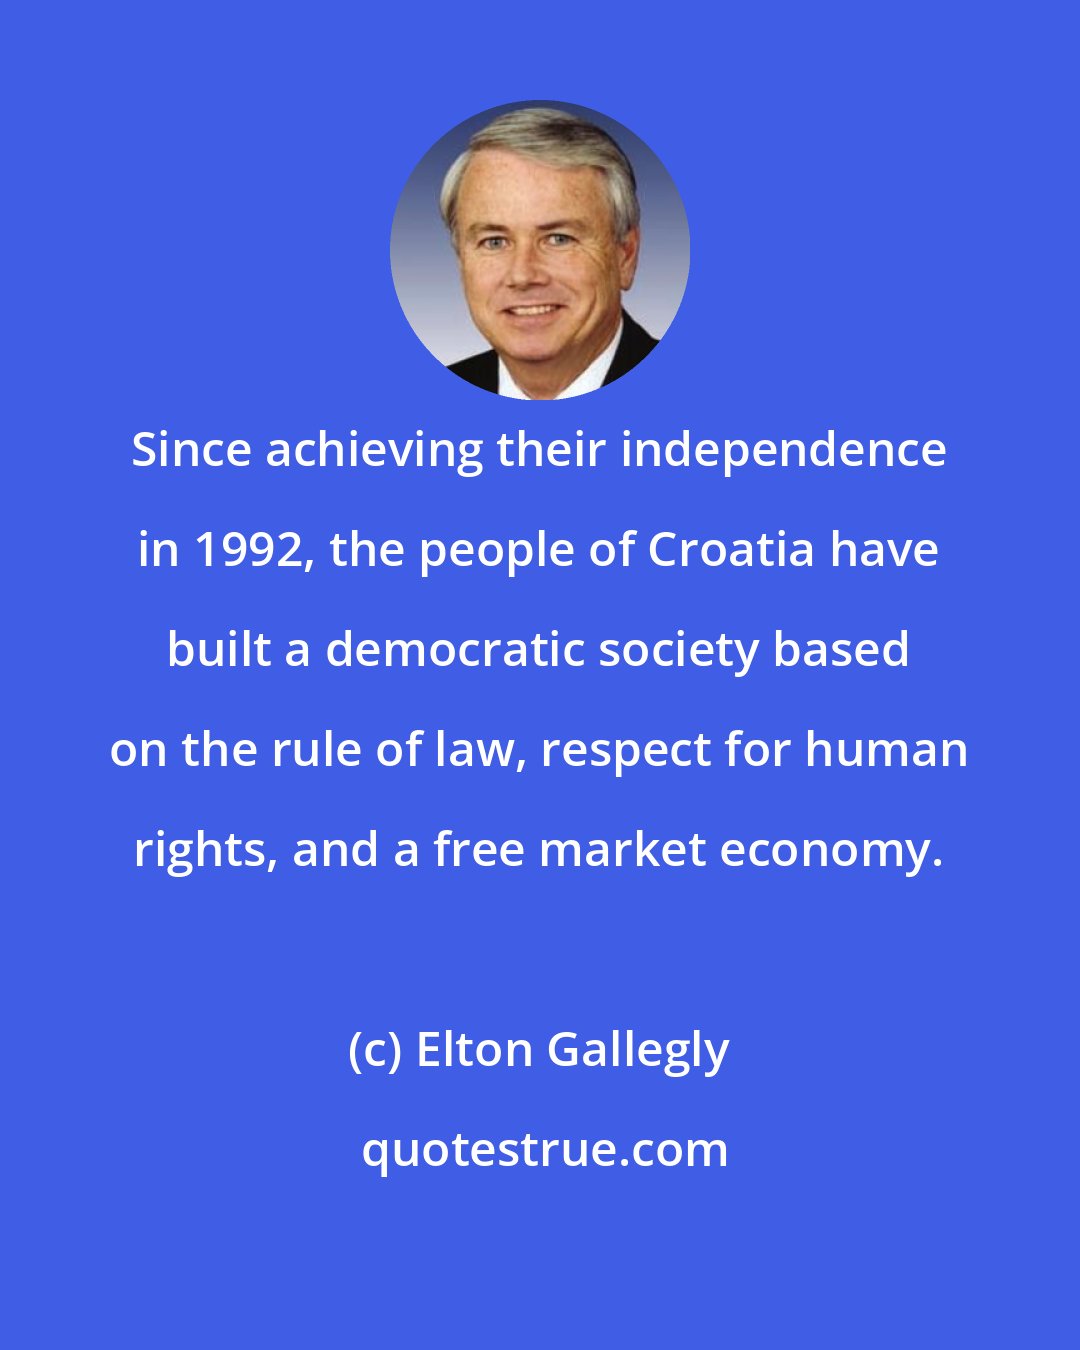 Elton Gallegly: Since achieving their independence in 1992, the people of Croatia have built a democratic society based on the rule of law, respect for human rights, and a free market economy.